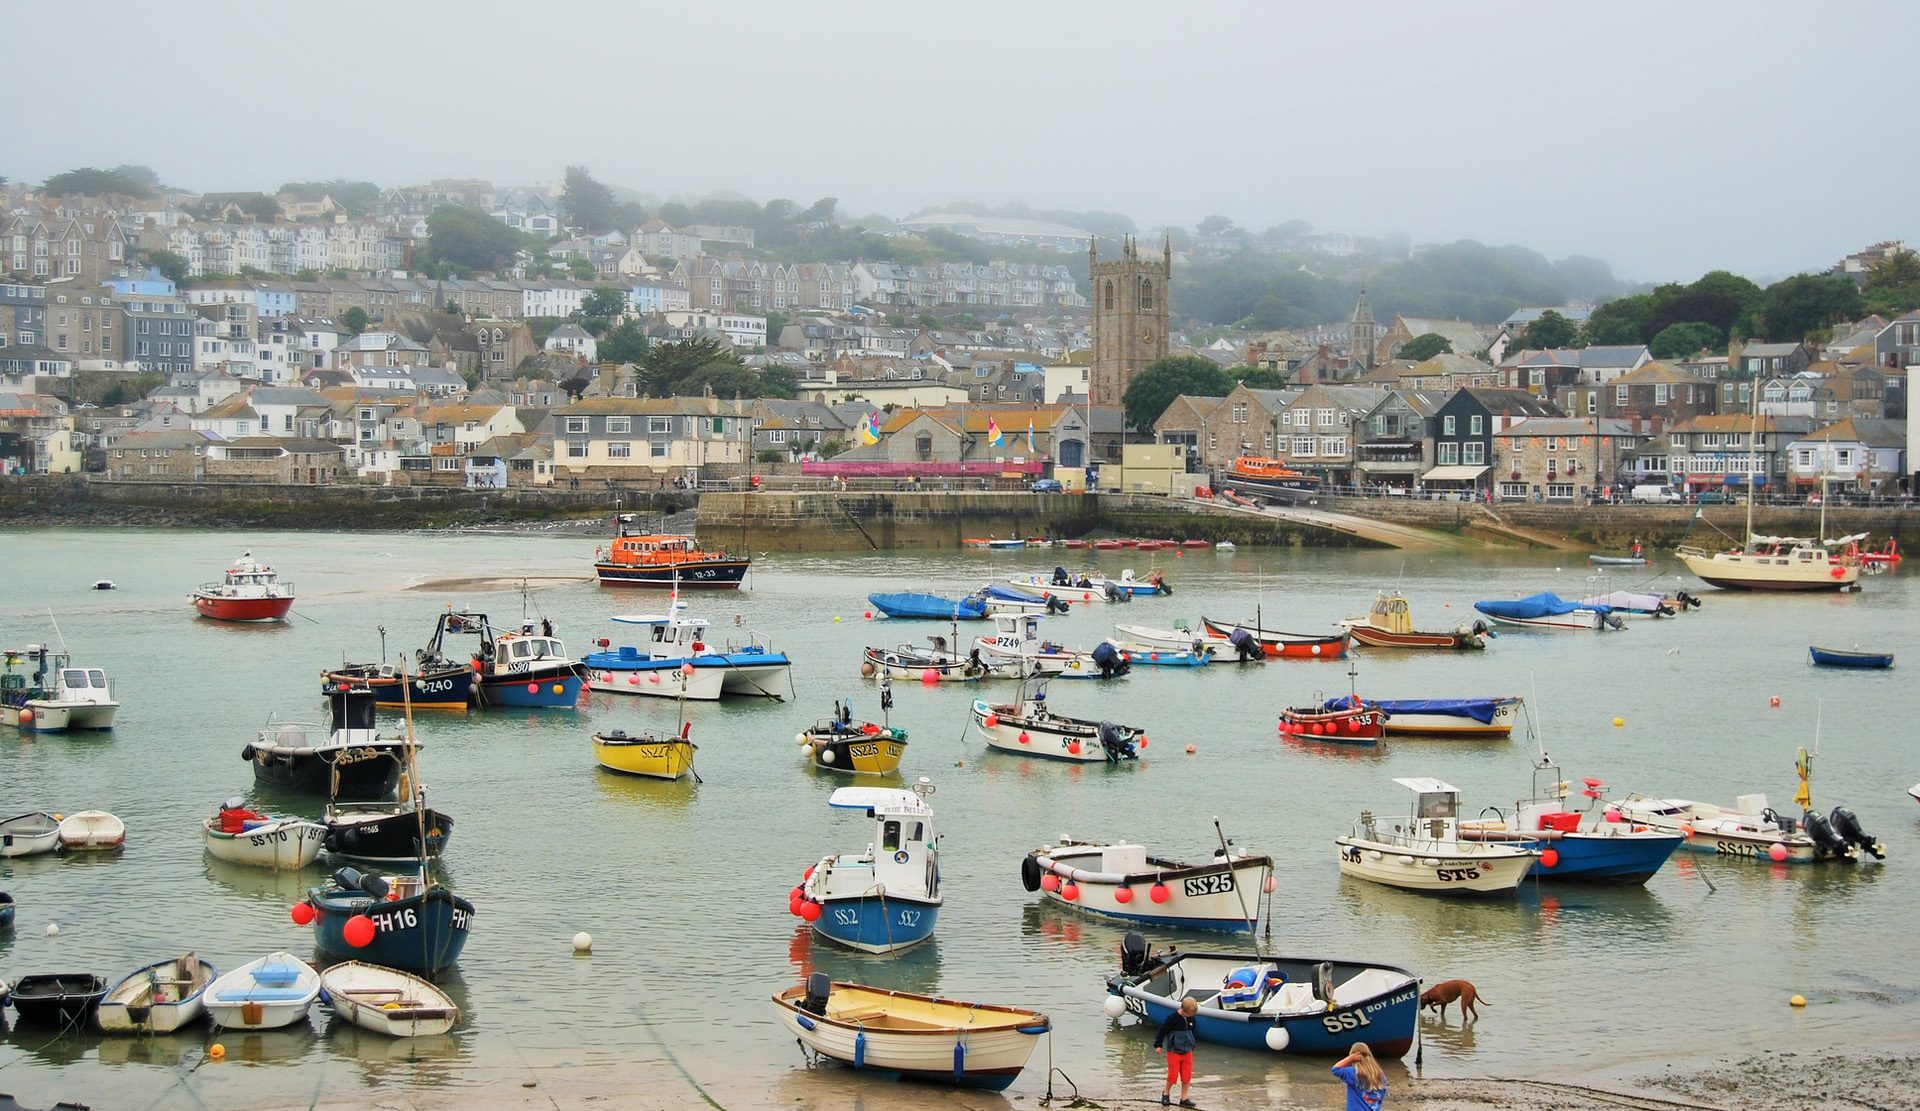 A misty day in St Ives bay. Filled with colourful boats 